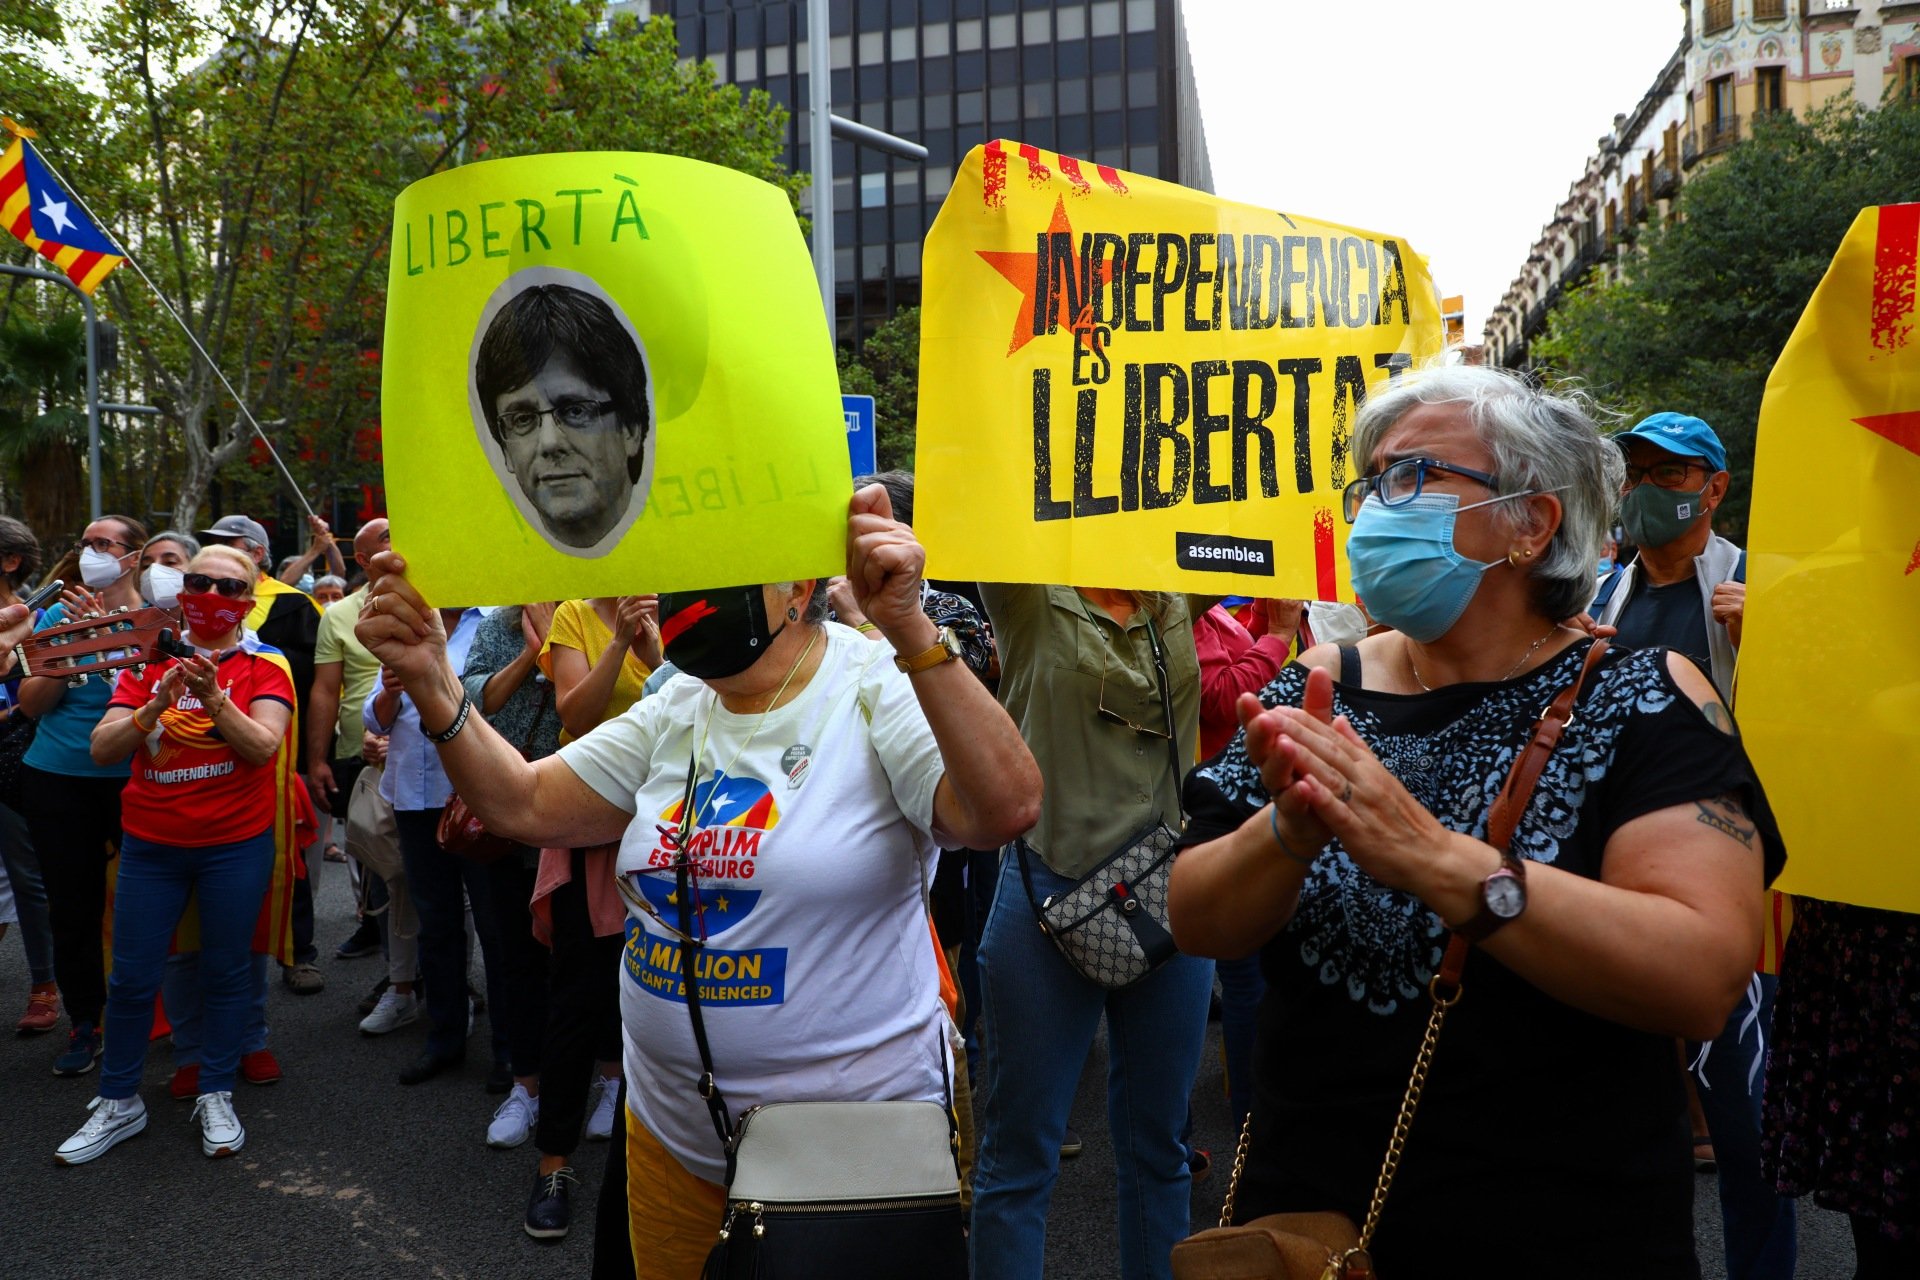 Independence movement takes to streets after Puigdemont arrest: "Our president"